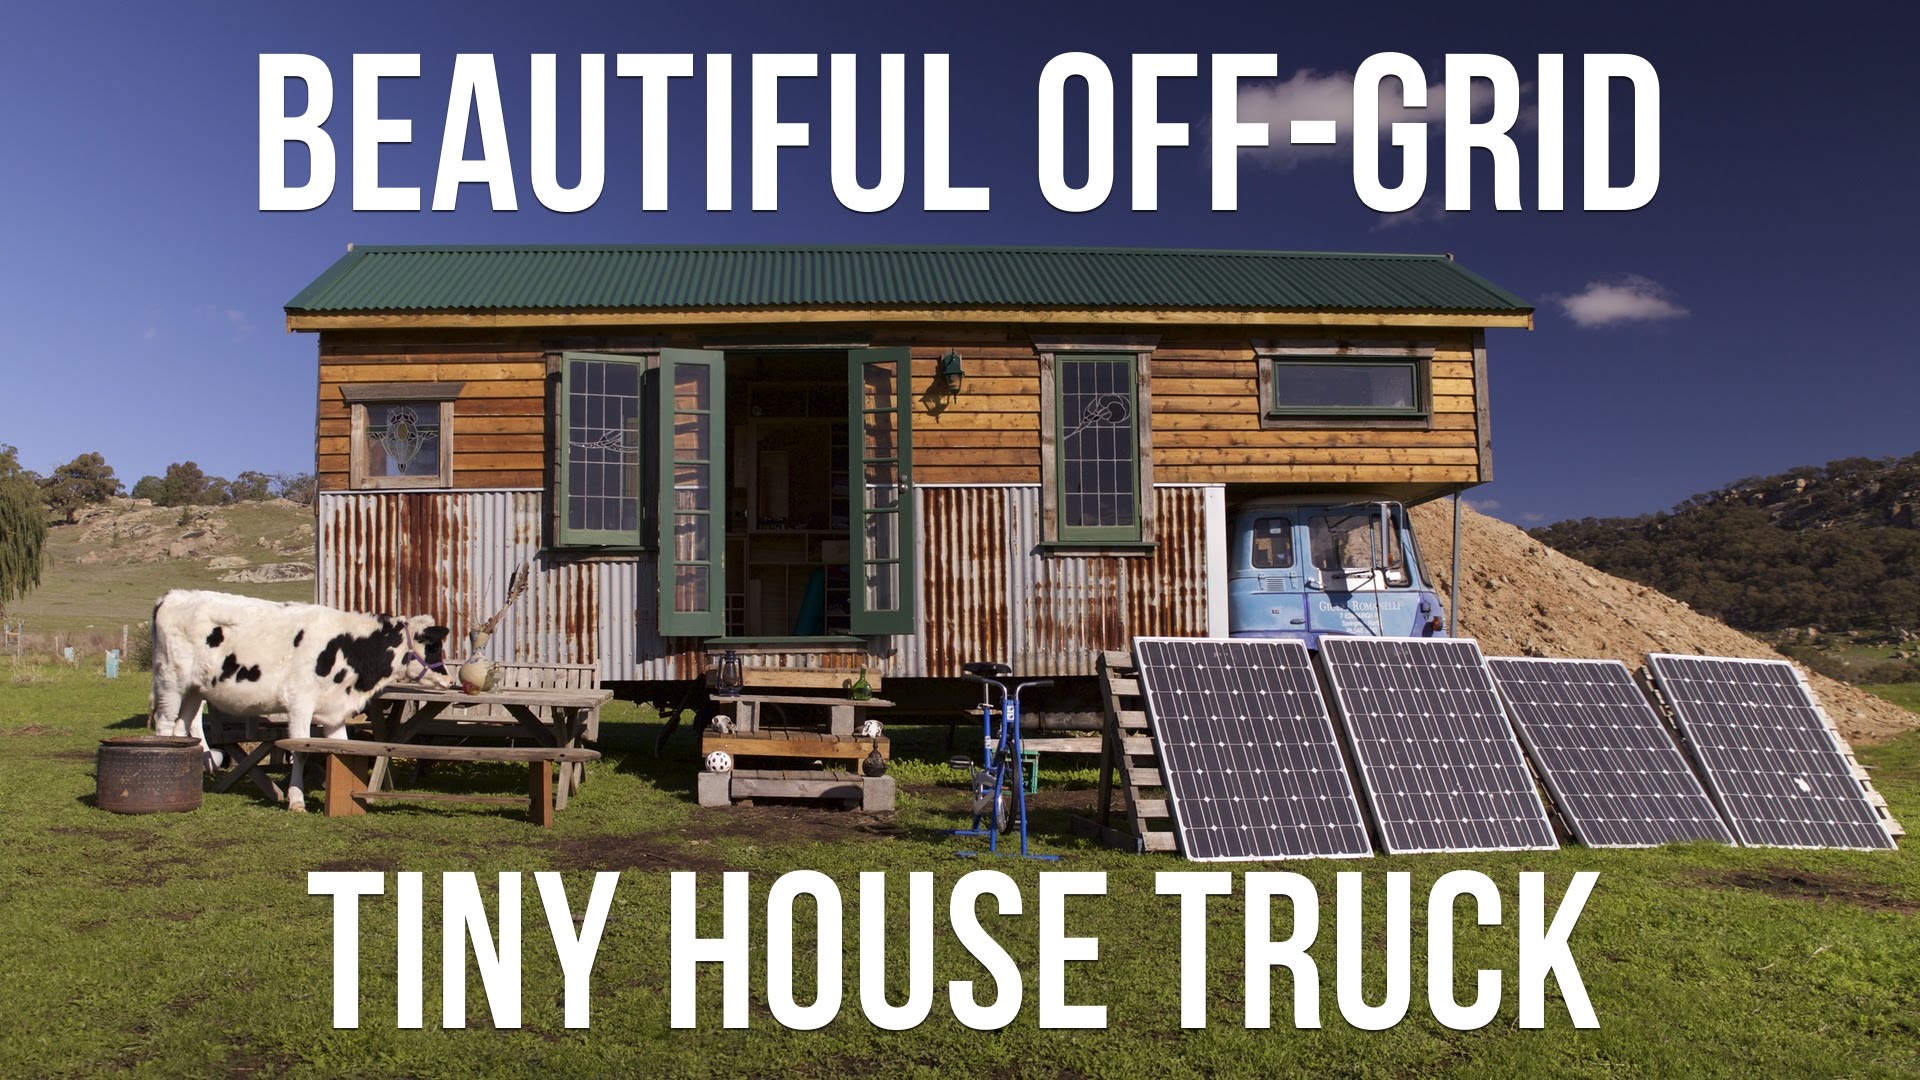 Beautiful Off-Grid Tiny House Truck Made With 85% Recycled Materials...